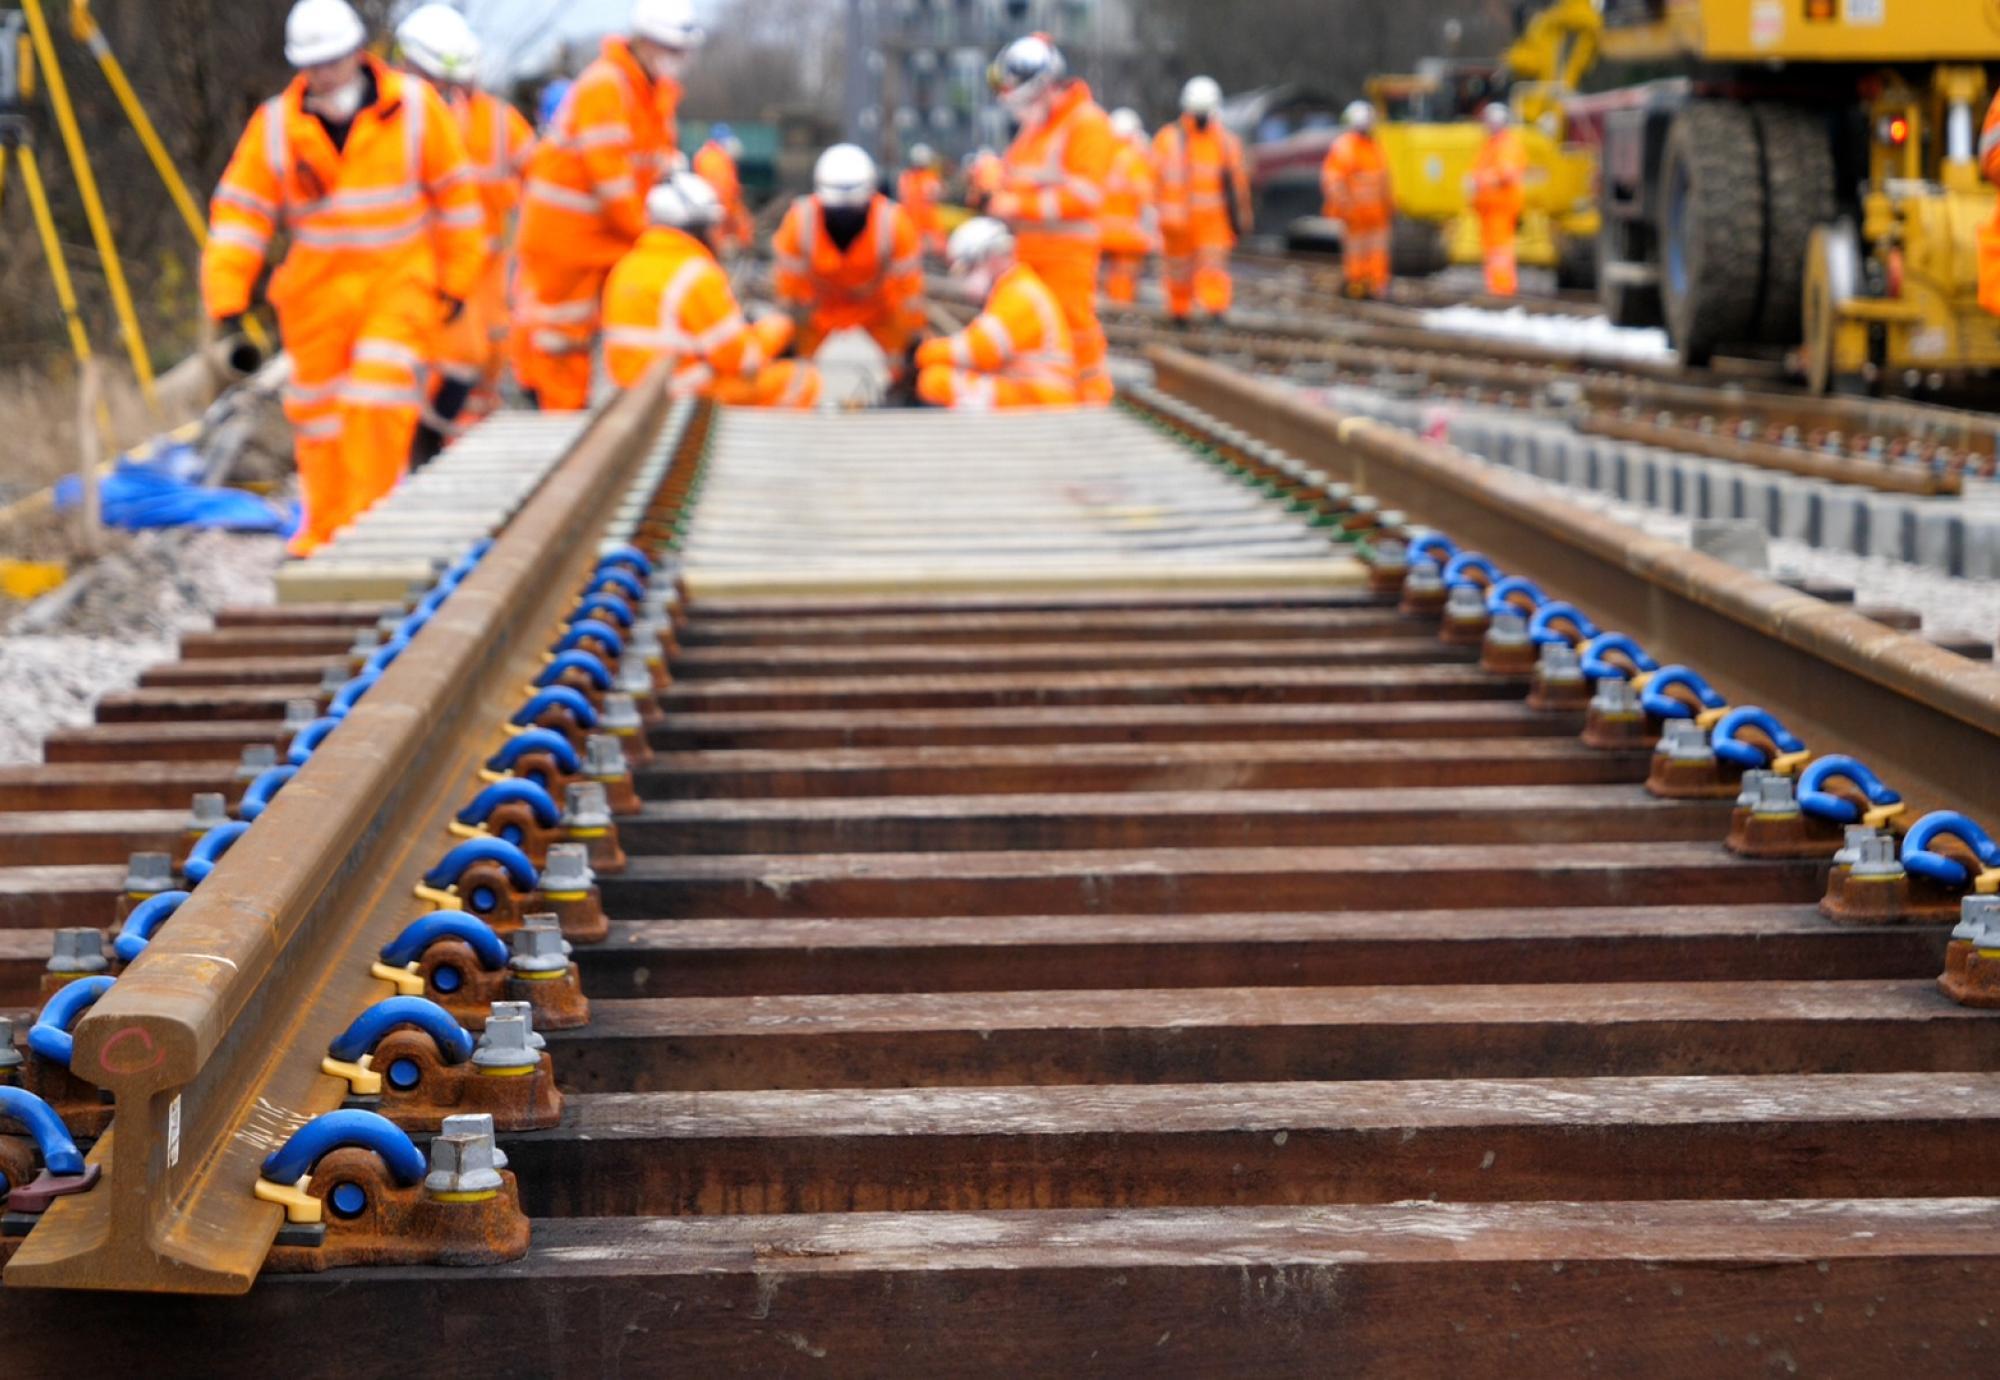 New track being installed during engineering work, via Istock 